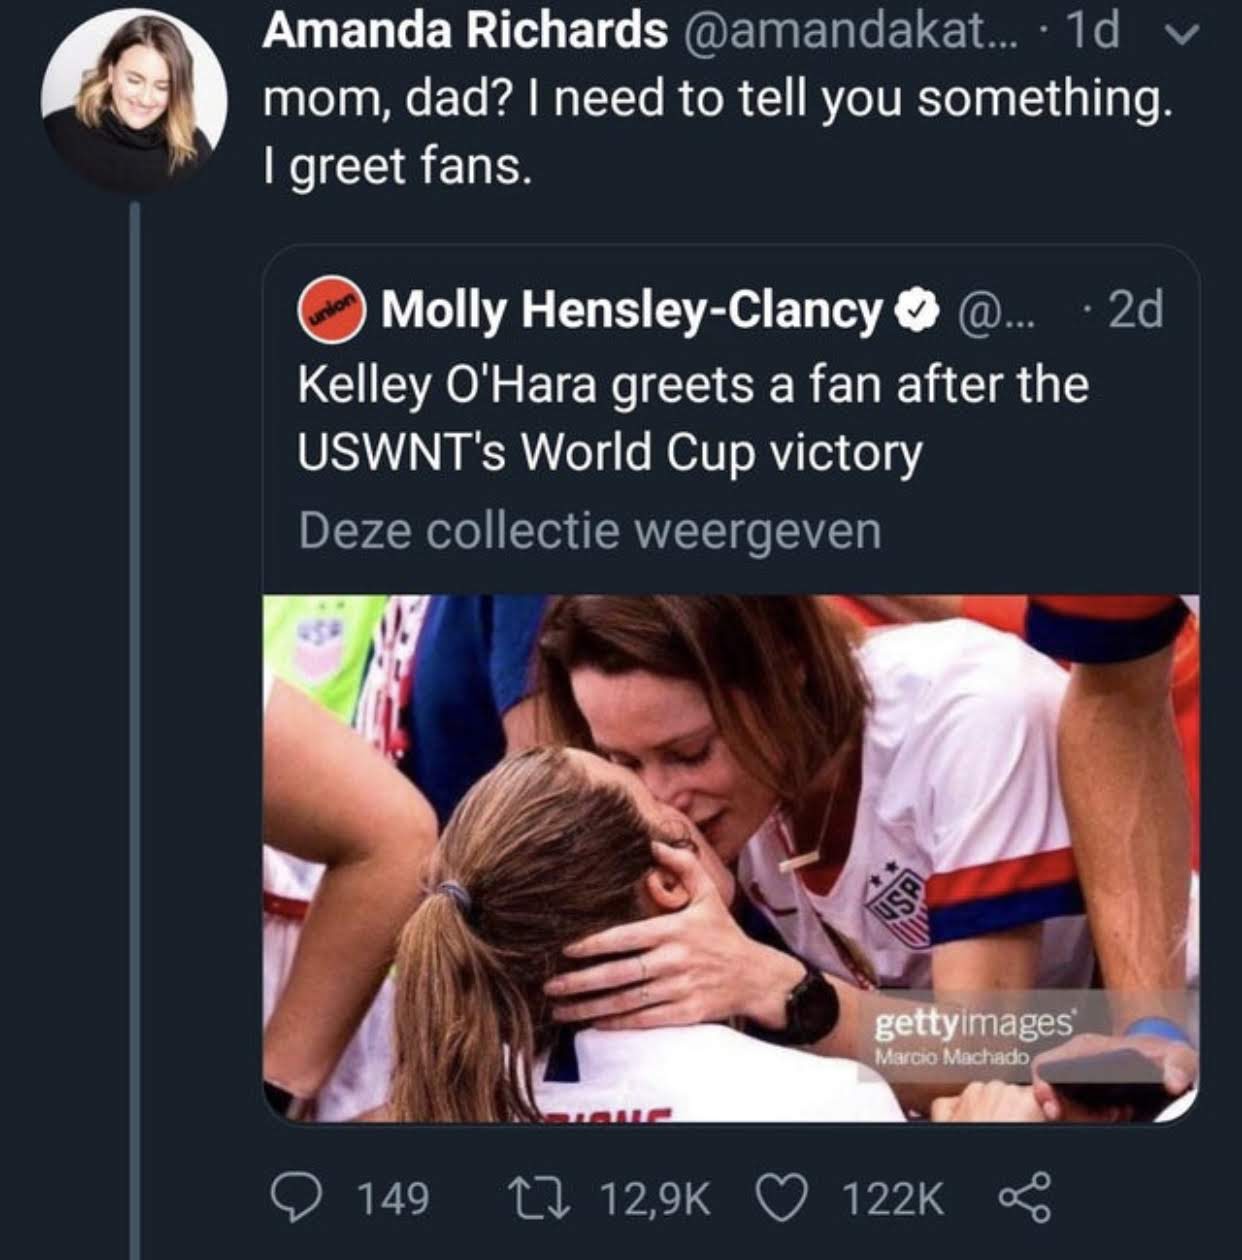 kelley o hara kisses girlfriend - Amanda Richards ... 1d v mom, dad? I need to tell you something. I greet fans. Amanda Richards @ 2d Molly HensleyClancy @... Kelley O'Hara greets a fan after the Uswnt's World Cup victory Deze collectie weergeven gettyima